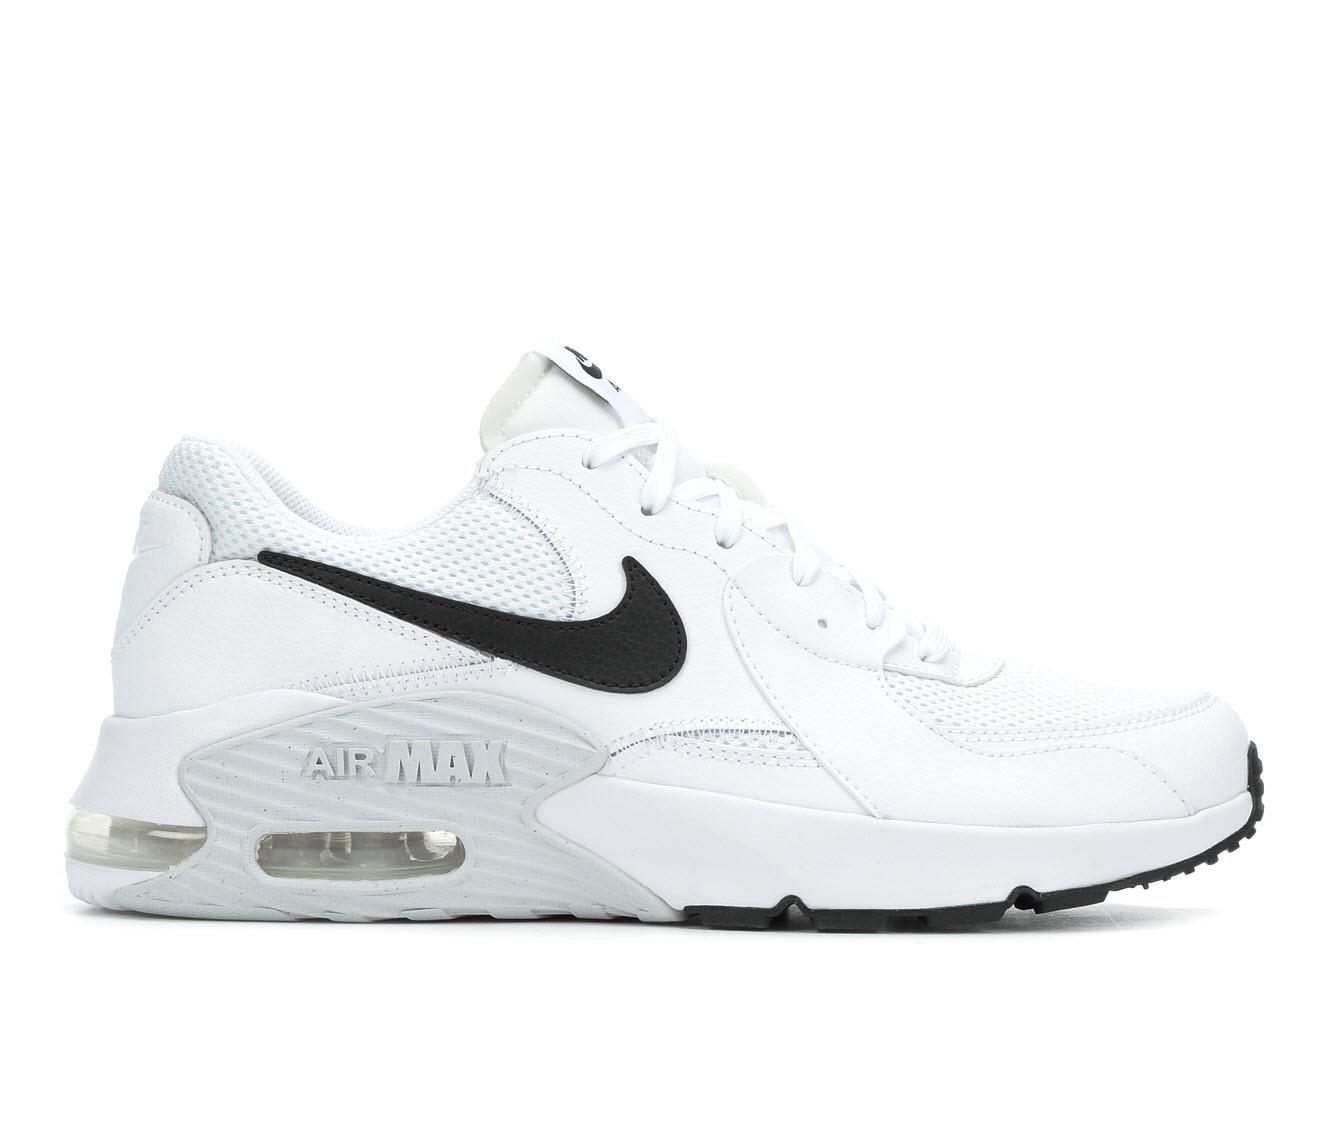 Shoes for Men, Air Max | Shoe Carnival